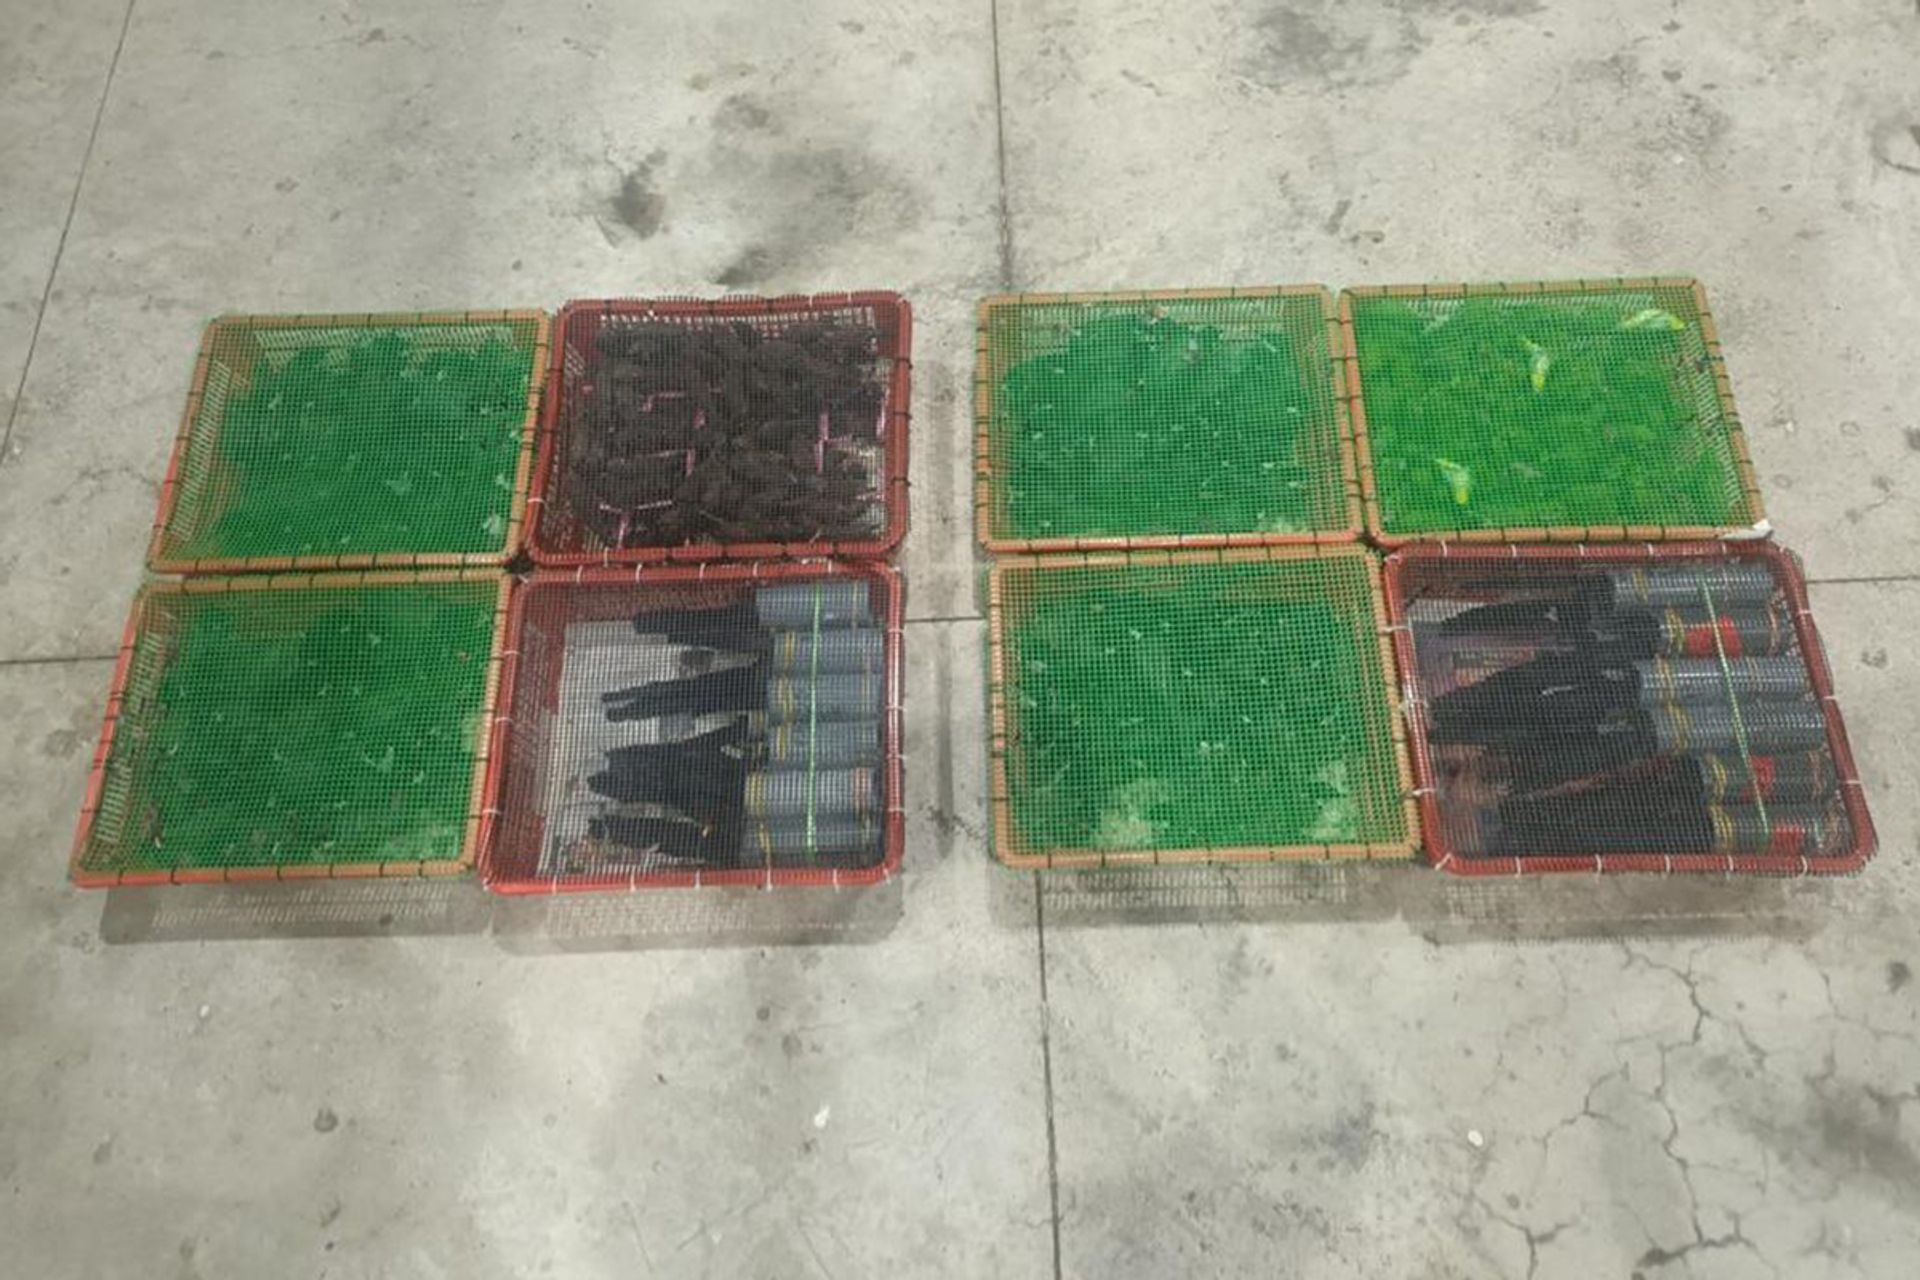 The authorities found 337 birds hidden underneath a makeshift bed behind the driver’s seat of a lorry entering Singapore via Tuas Checkpoint in March. They included 24 white-rumped shamas, a protected species that cannot be traded without a permit. PHOTO: NPARKS